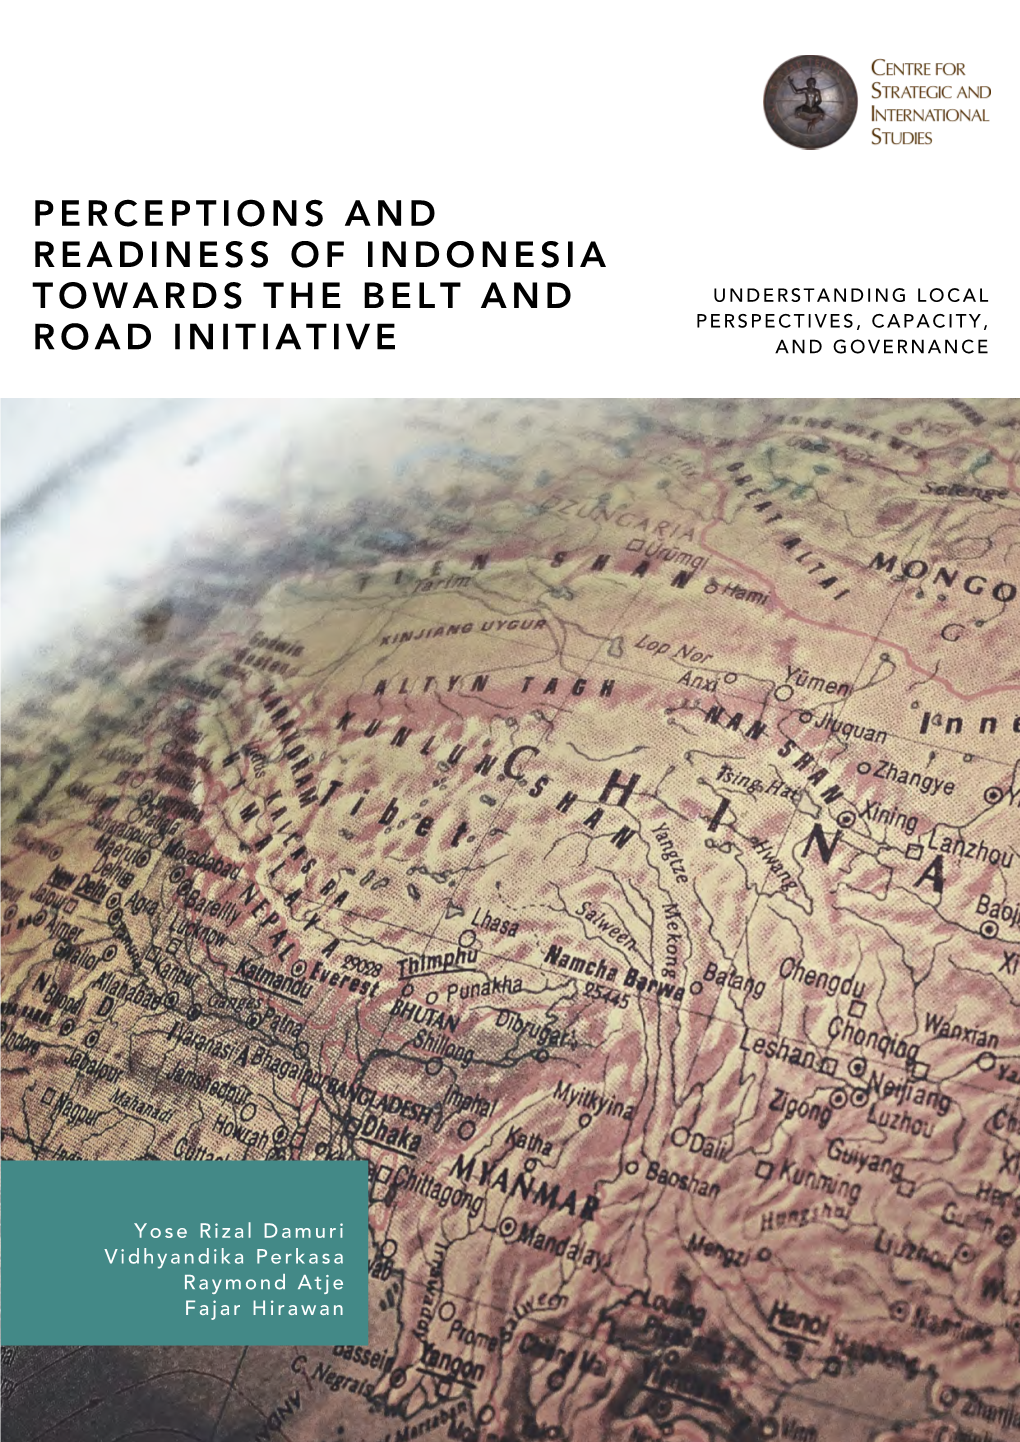 Perceptions and Readiness of Indonesia Towards the Belt and Understanding Local Perspectives, Capacity, Road Initiative and Governance